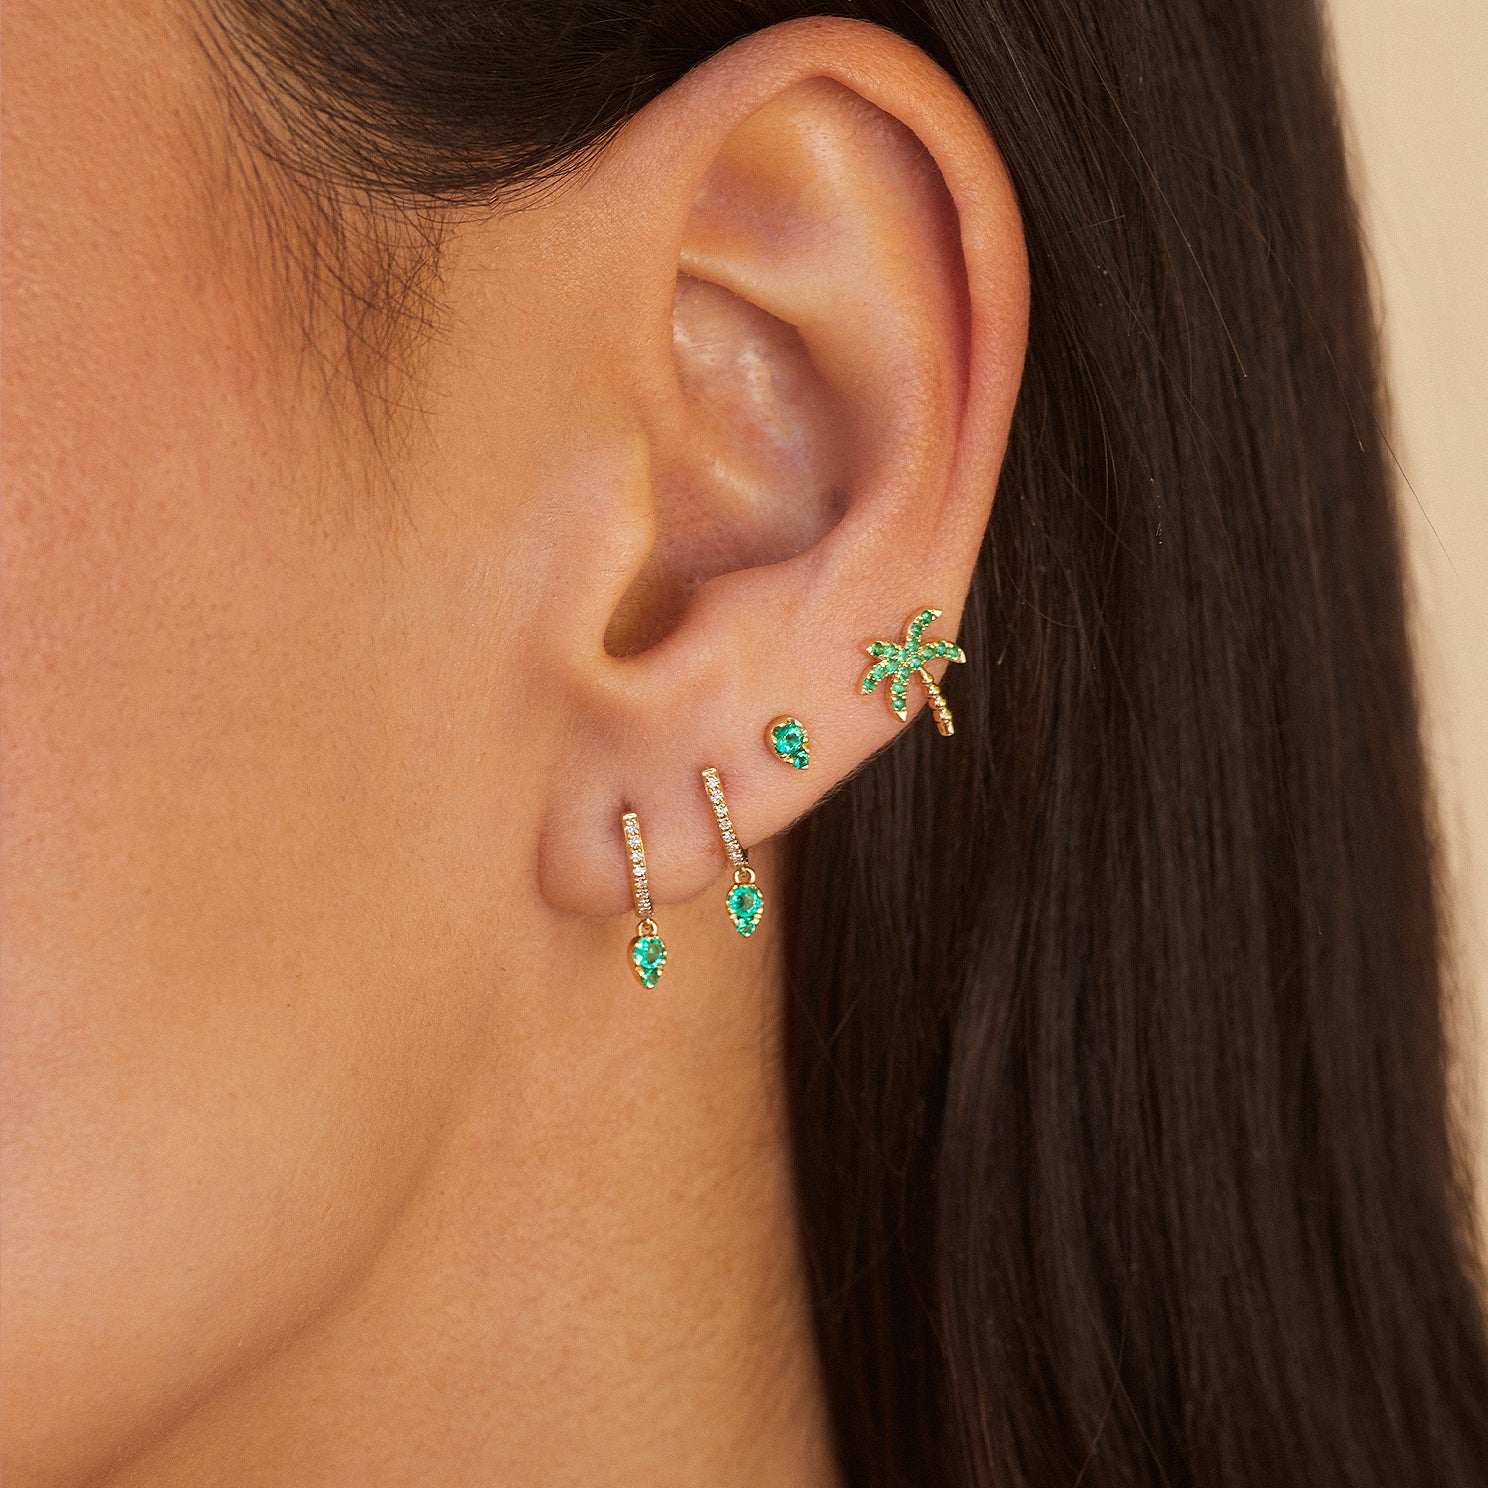 Emerald Teardrop Diamond Mini Huggie Earring in 14k yellow gold styled on first and second earring hole of model next to emerald stud earring and emerald palm tree earring